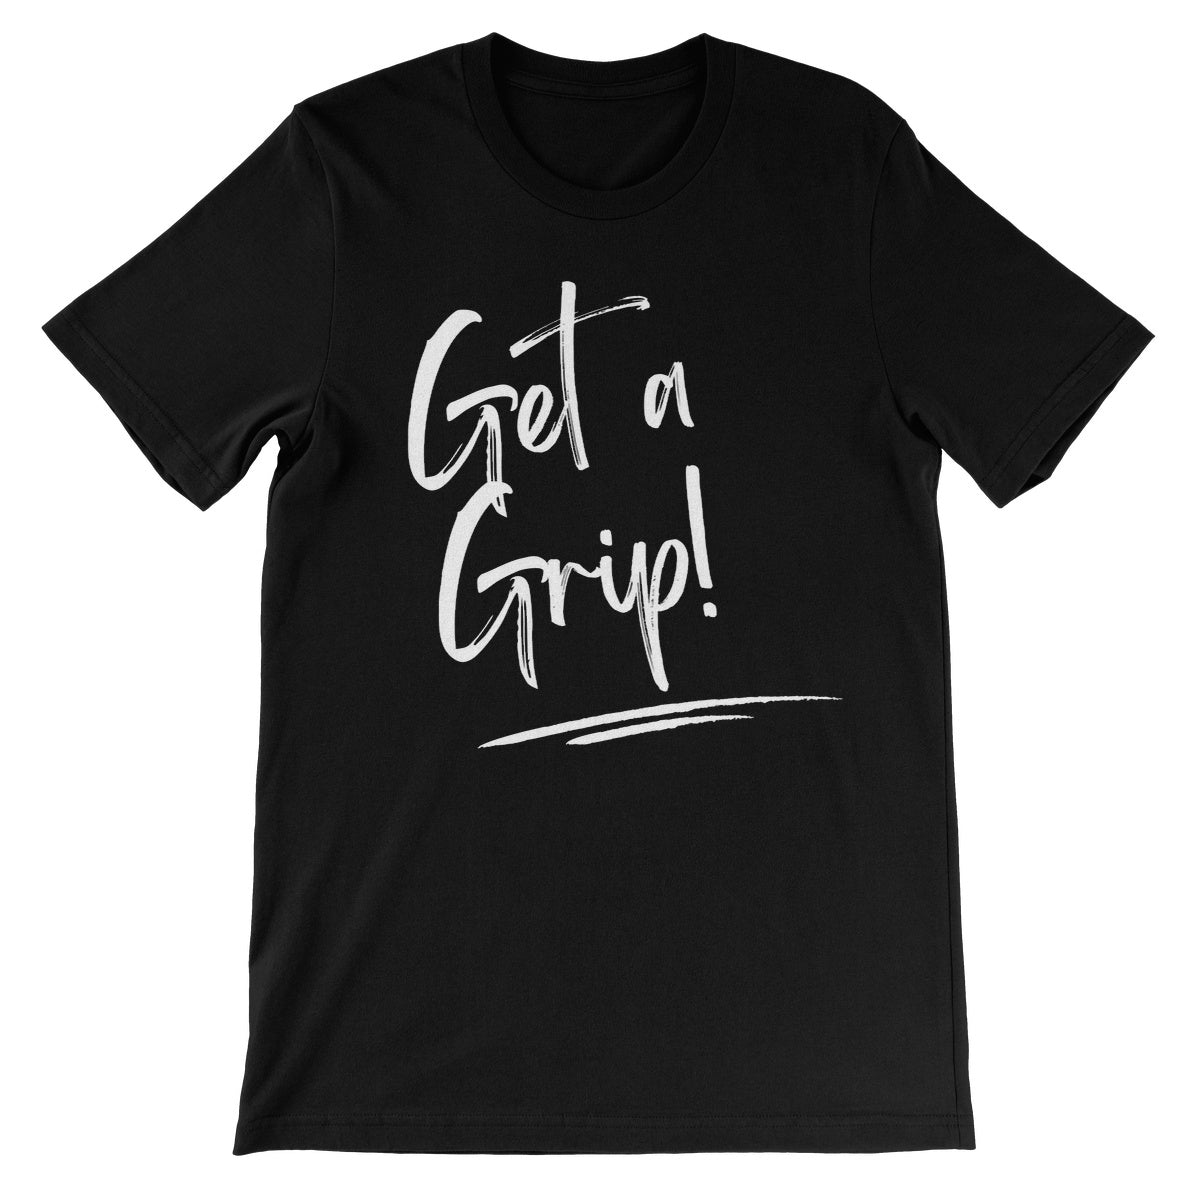 A black crew neck short sleeve unisex t-shirt with the words Get a Grip written across the front in white.